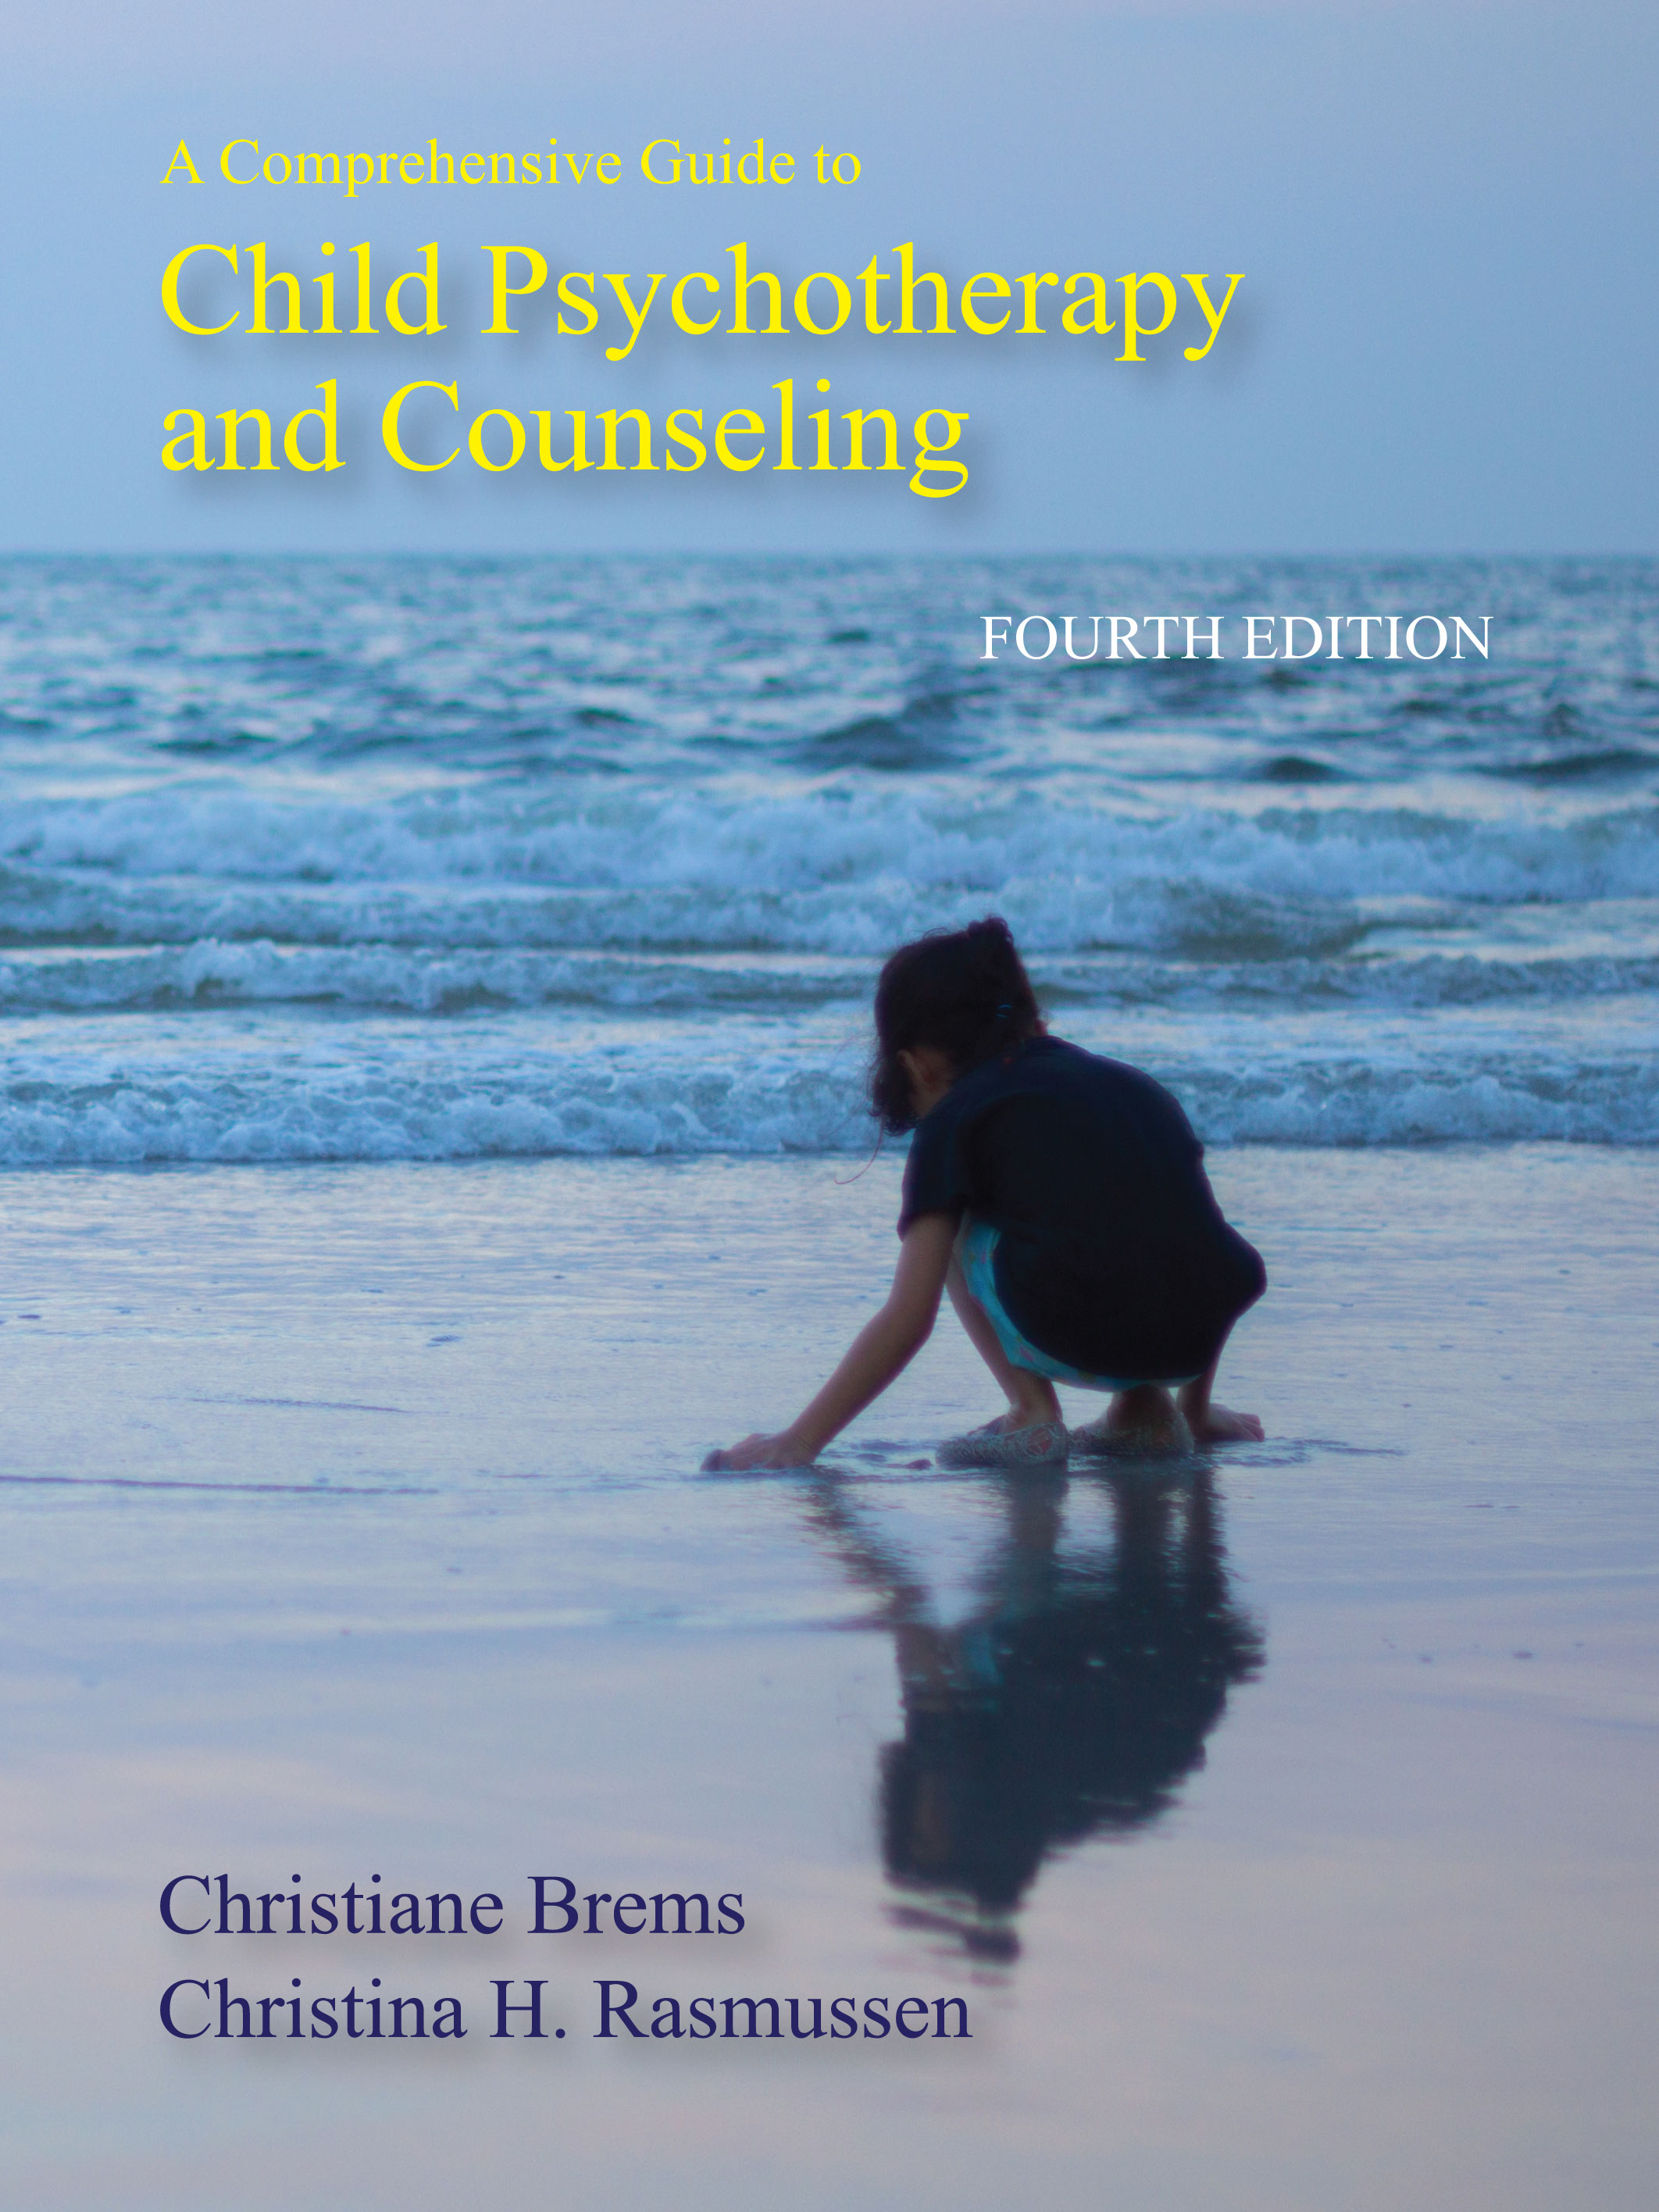 A Comprehensive Guide to Child Psychotherapy and Counseling: Fourth Edition by Christiane  Brems, Christina H. Rasmussen